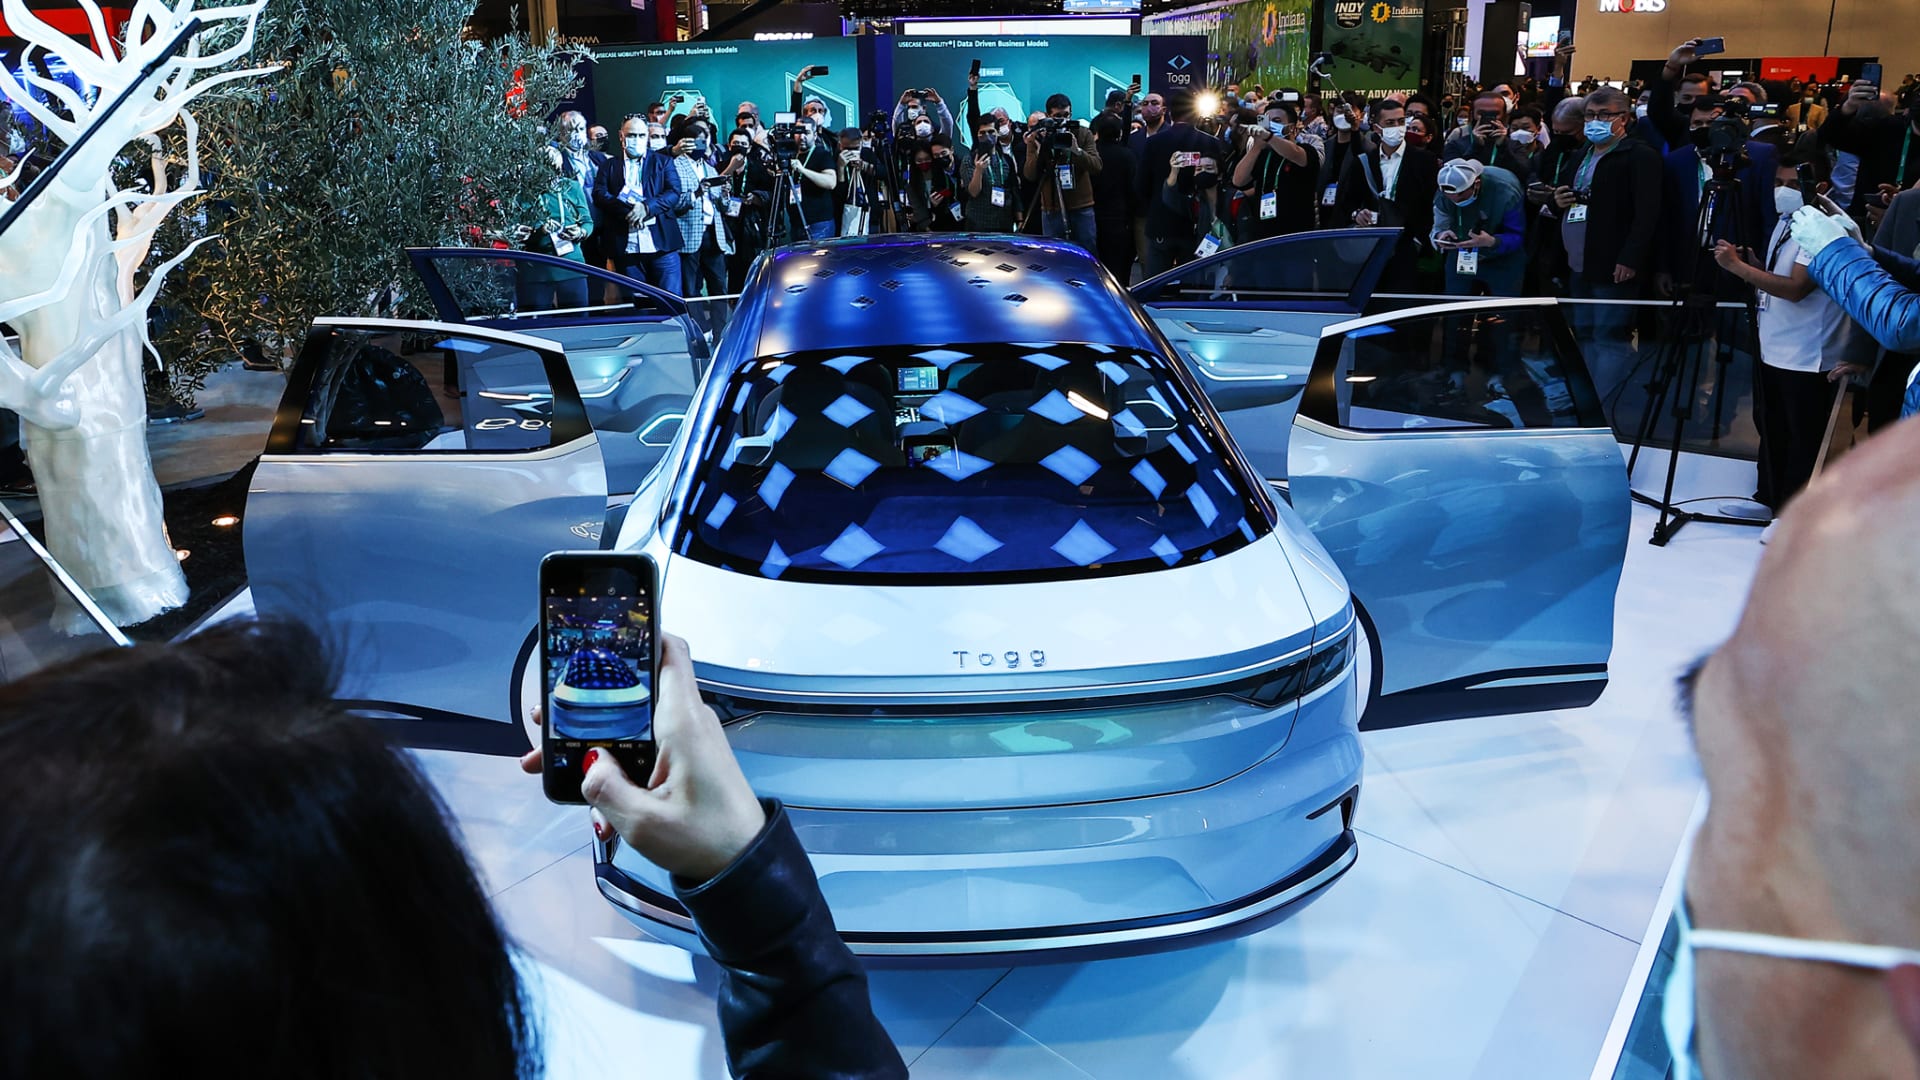 A concept car at CES from the Turkish tech company Togg, one of many automobile companies working on autonomous features.